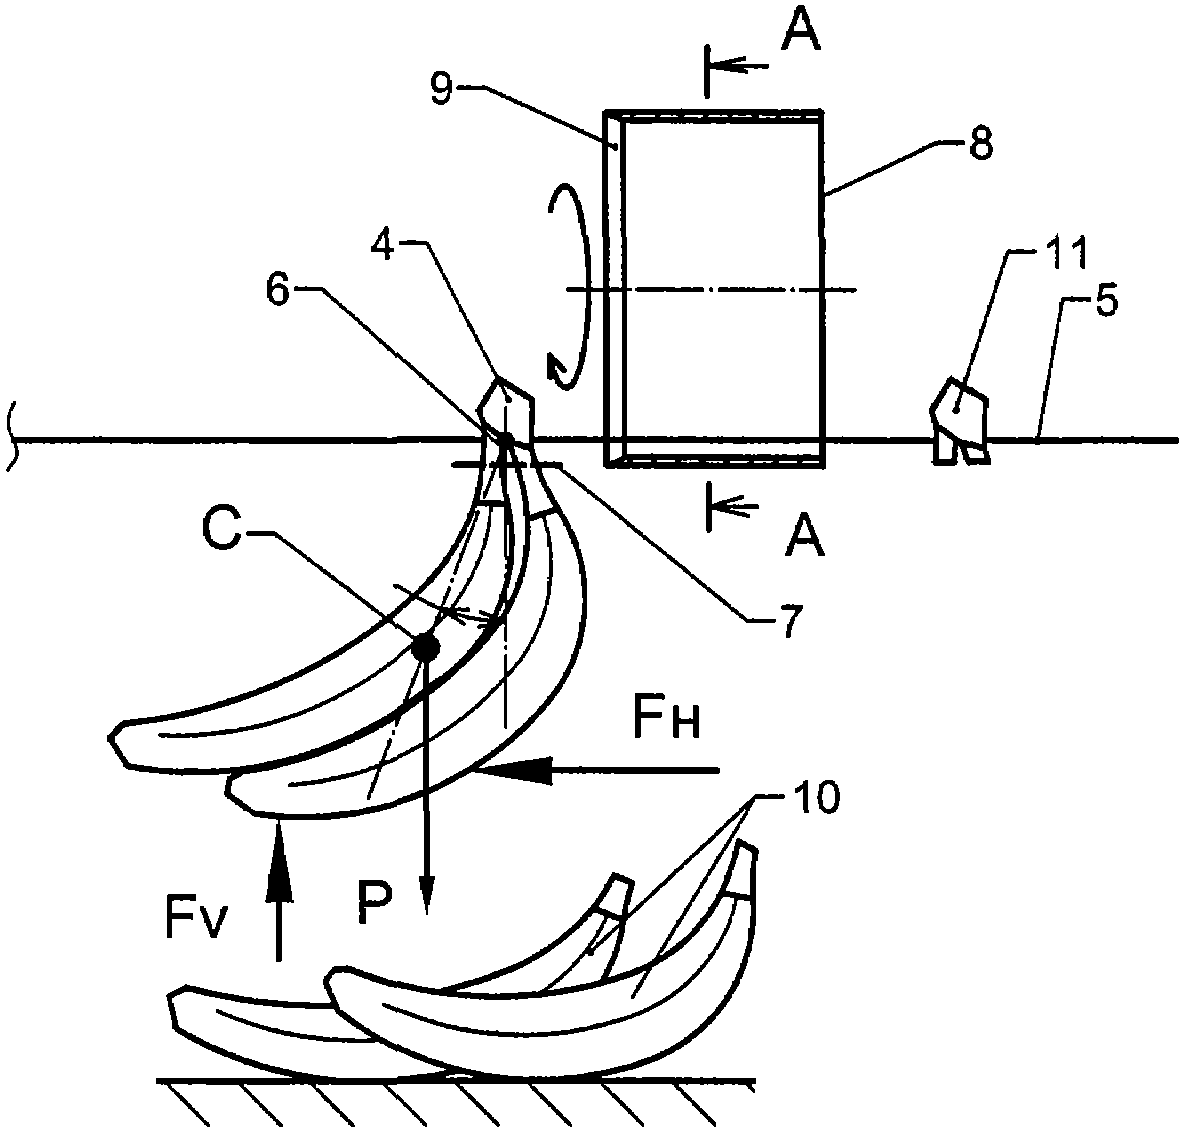 Method for separating banana clusters into separate bananas